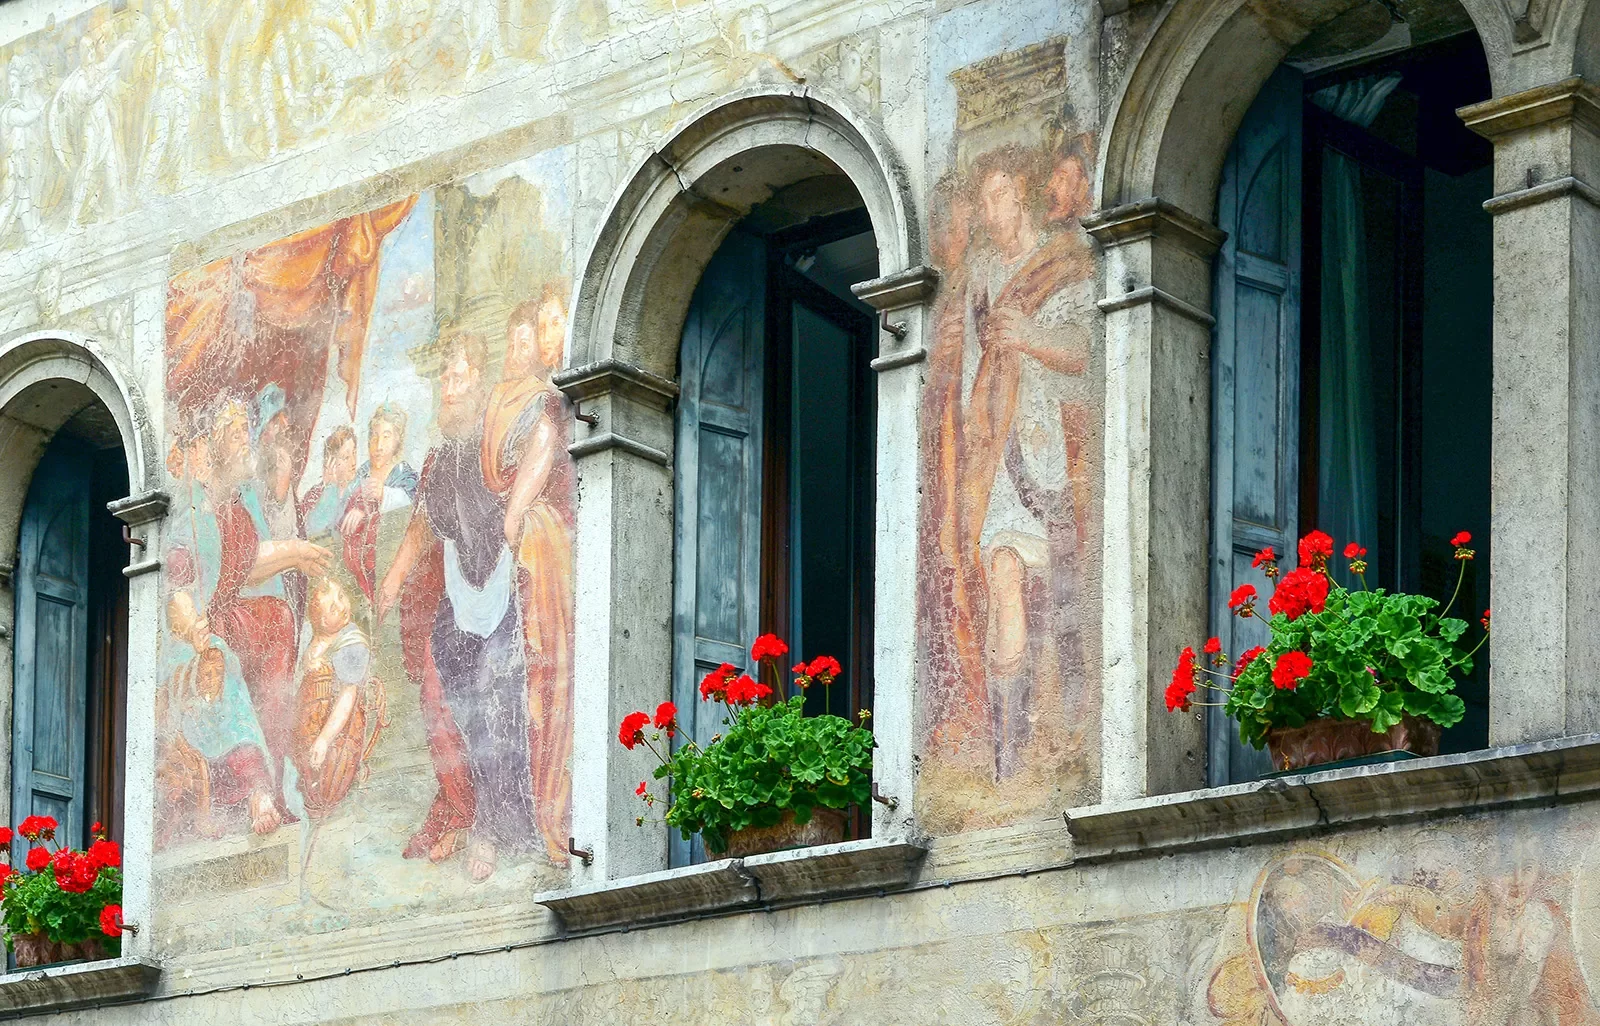 Shot of ancient mural on side of building, open windows, flowers.